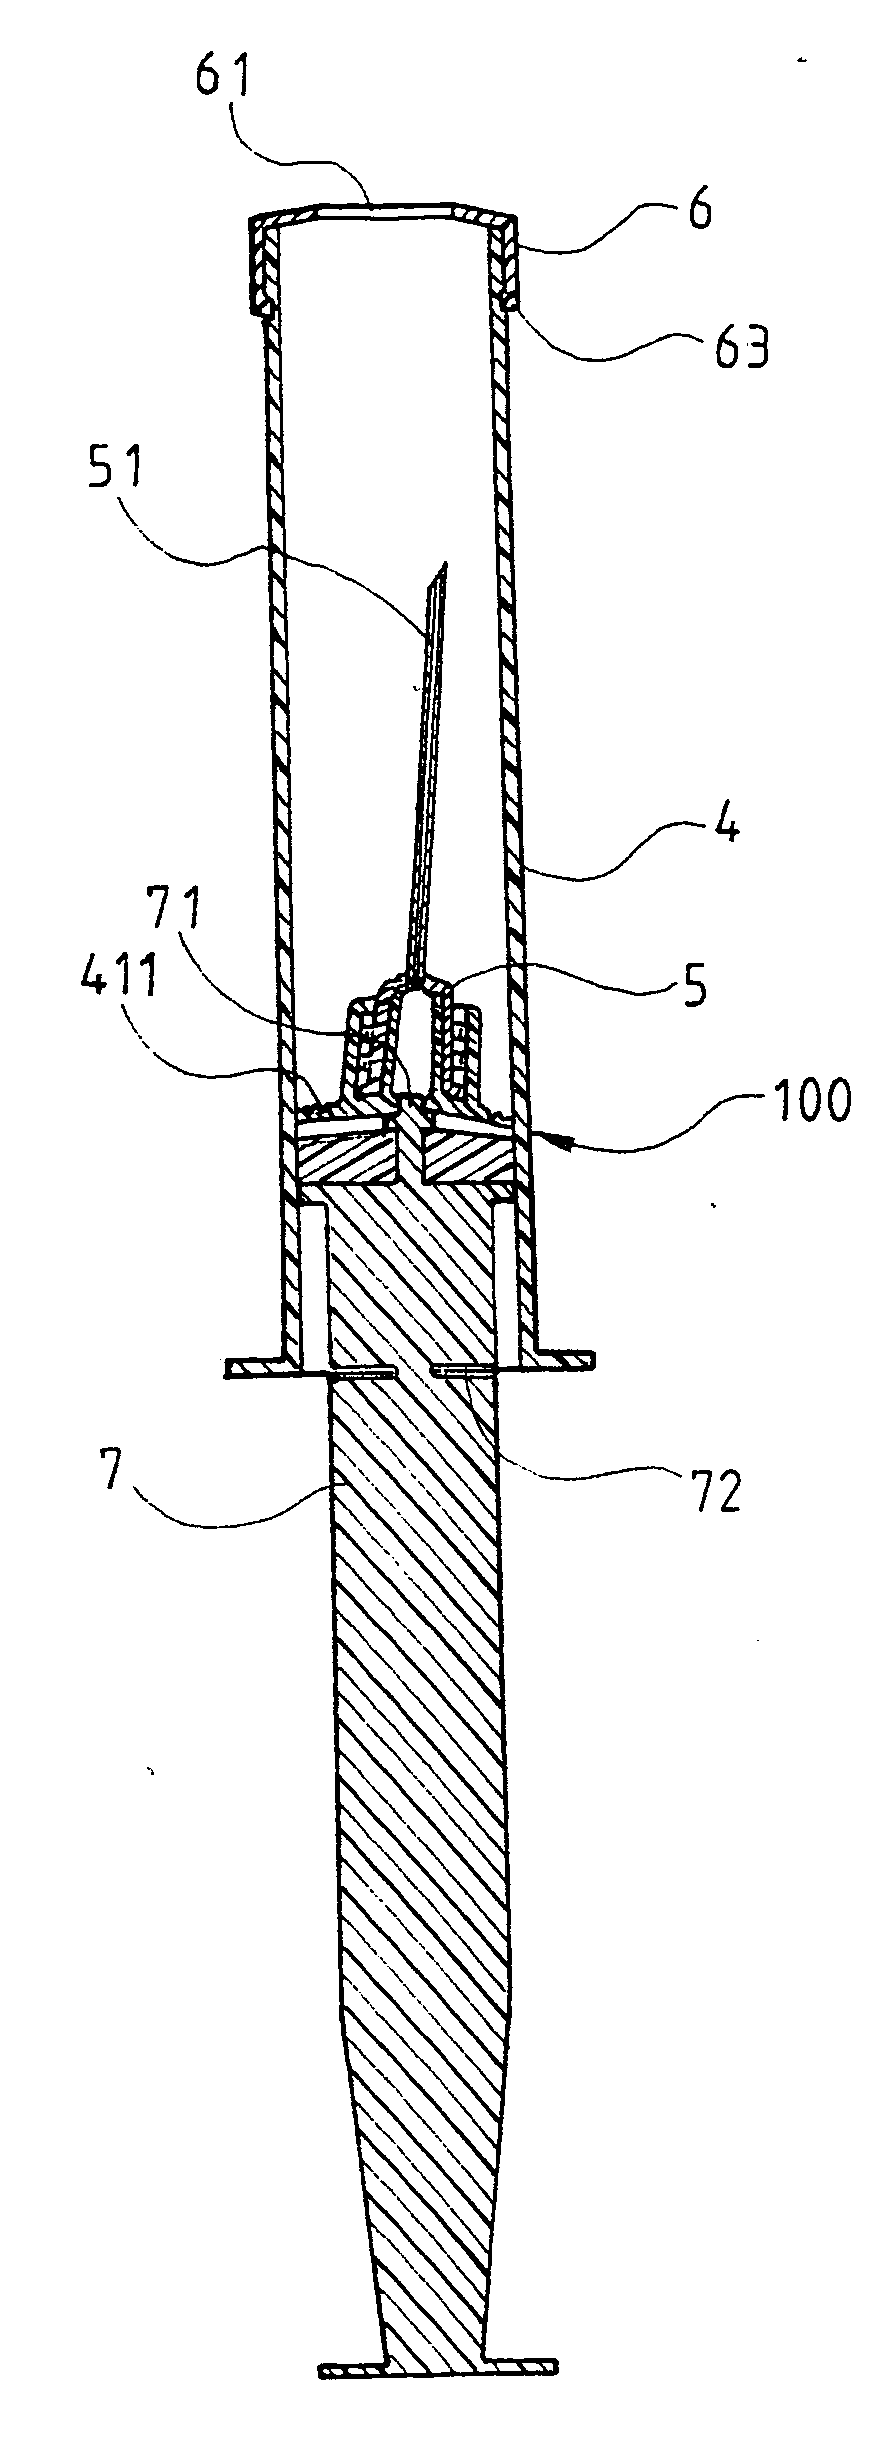 Retractable safety syringe